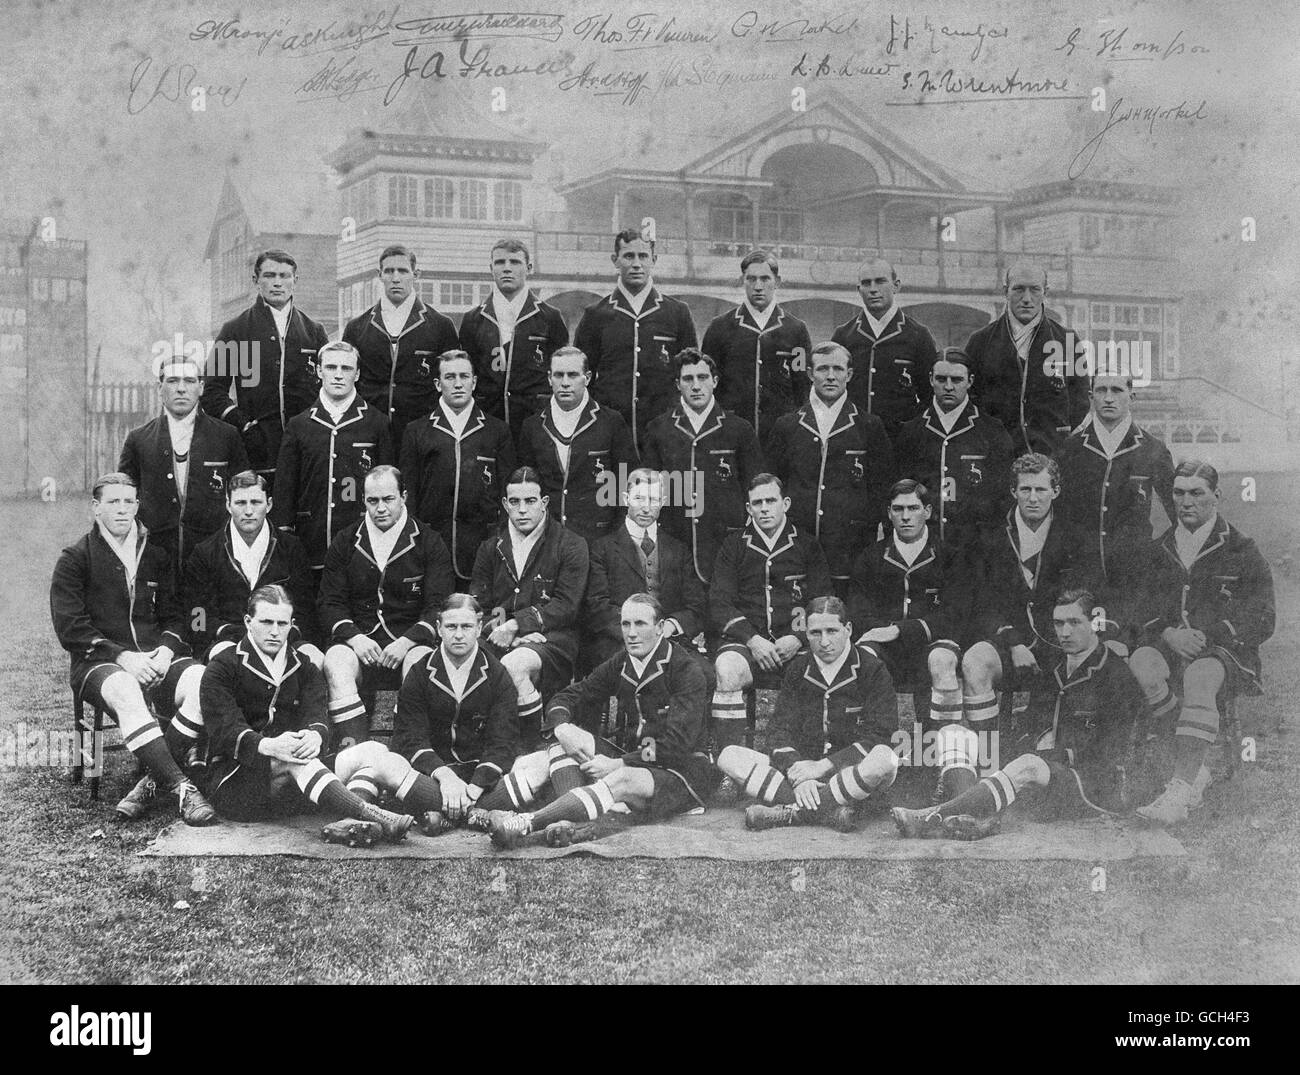 Rugby Team Groups. South Africa team group 1912 Stock Photo